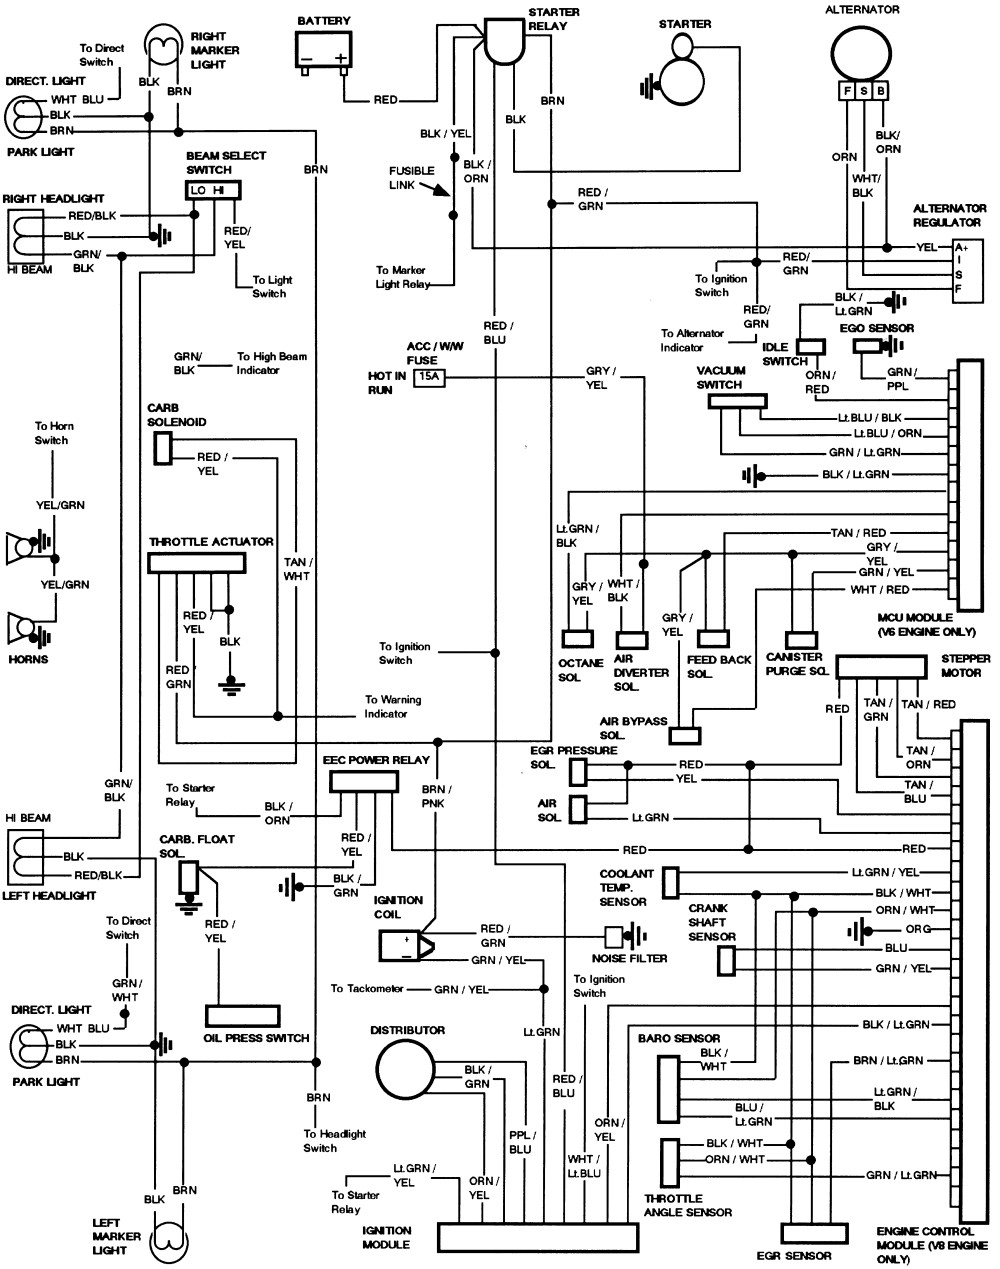 Wiring Diagram For 1985 Ford F150 Truck Enthusiasts Forums 1985 Mercury Grand Marquis Wiring Diagram 1985 Ford F 150 Wiring Diagram